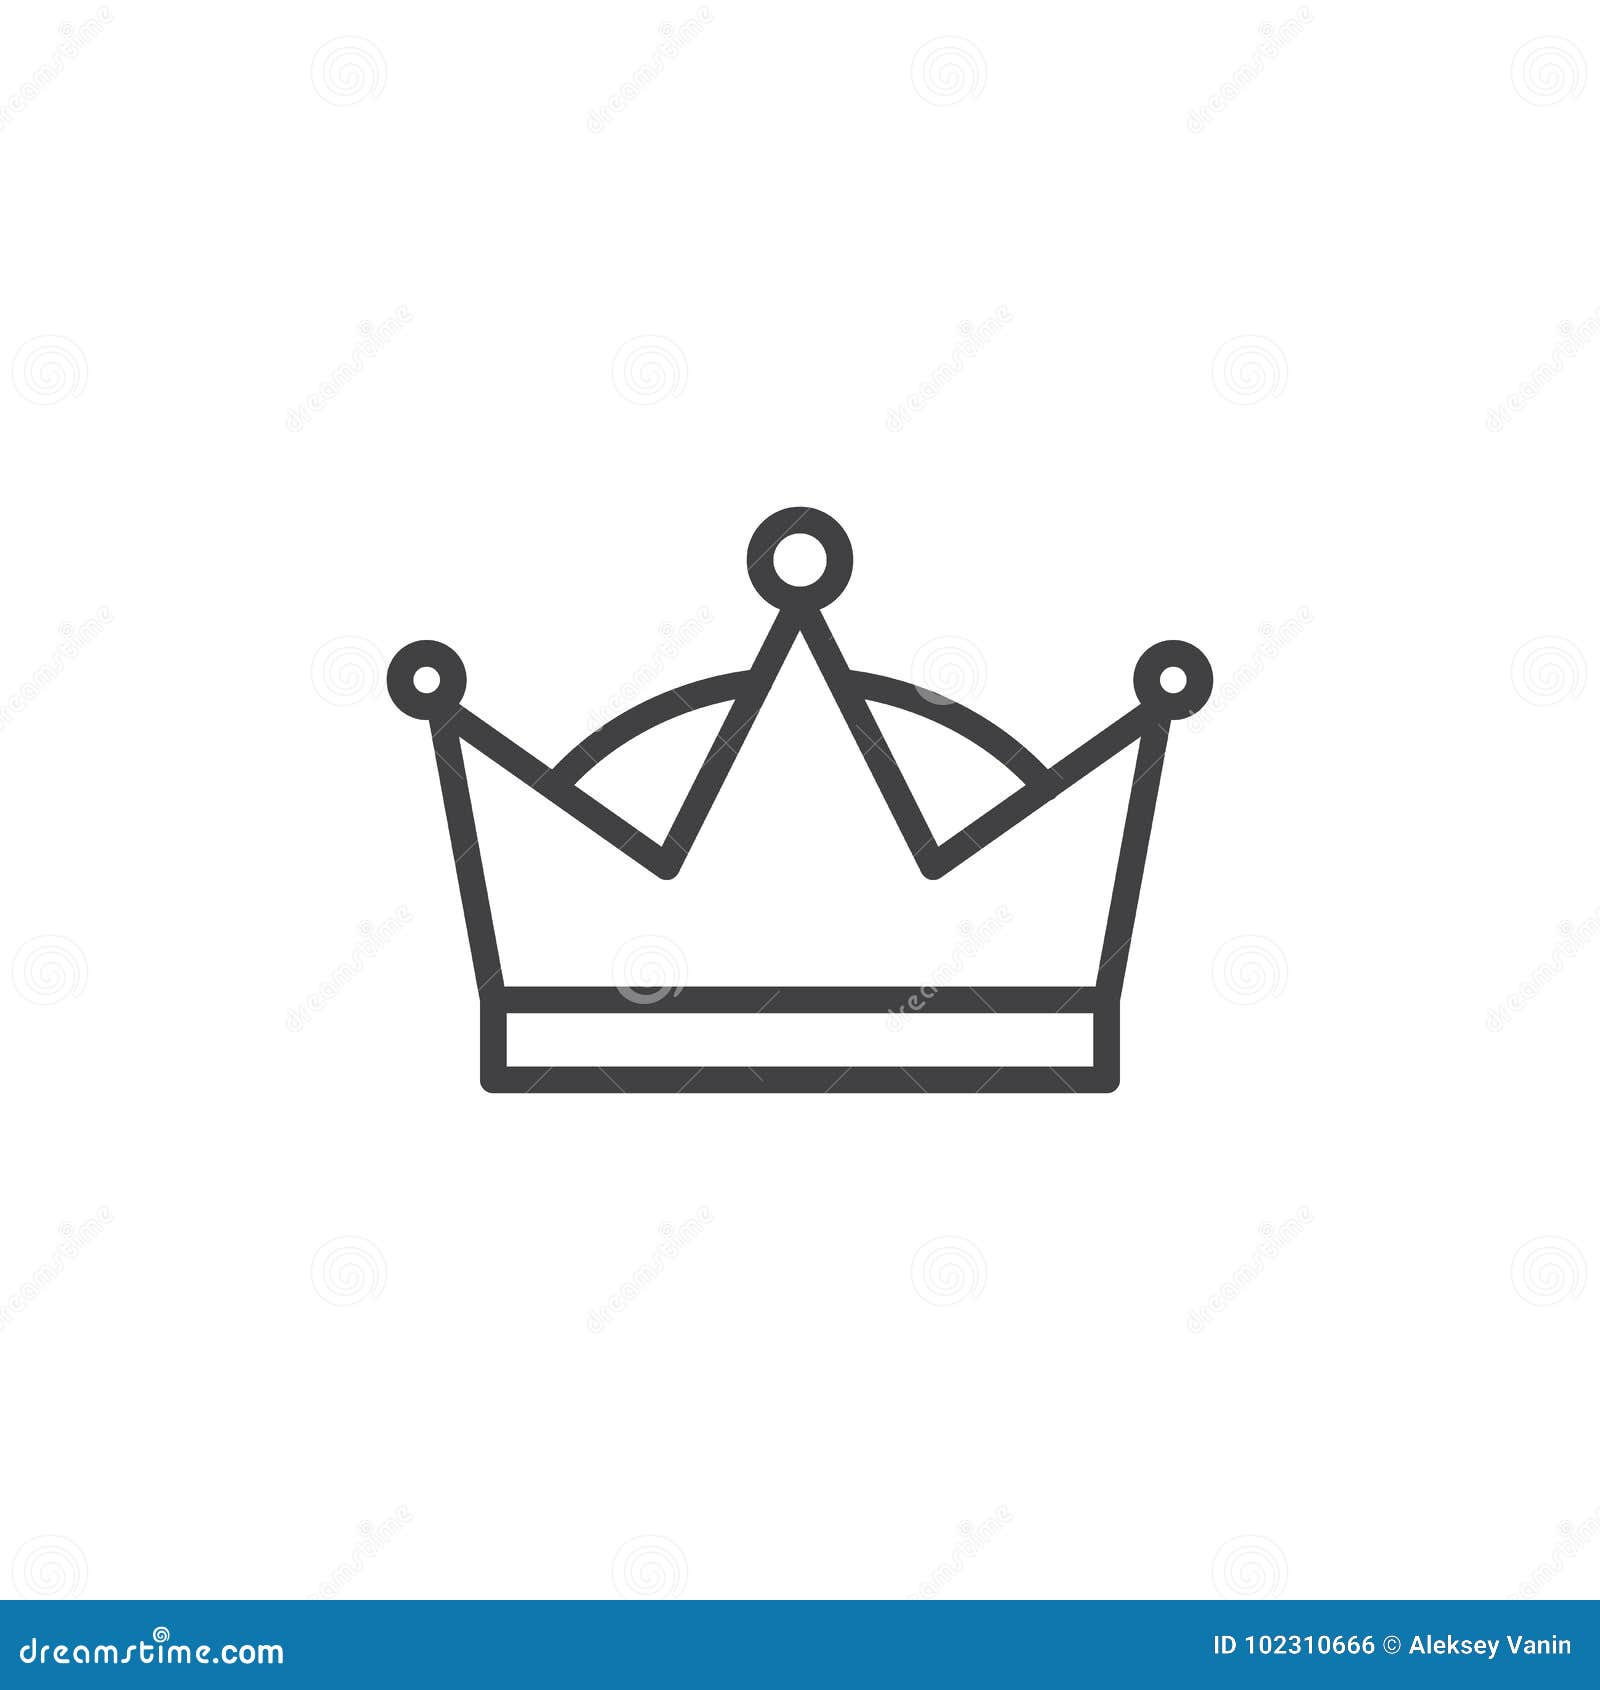 Crown Icon In Trendy Flat Style Isolated On White Background. Luxury ...